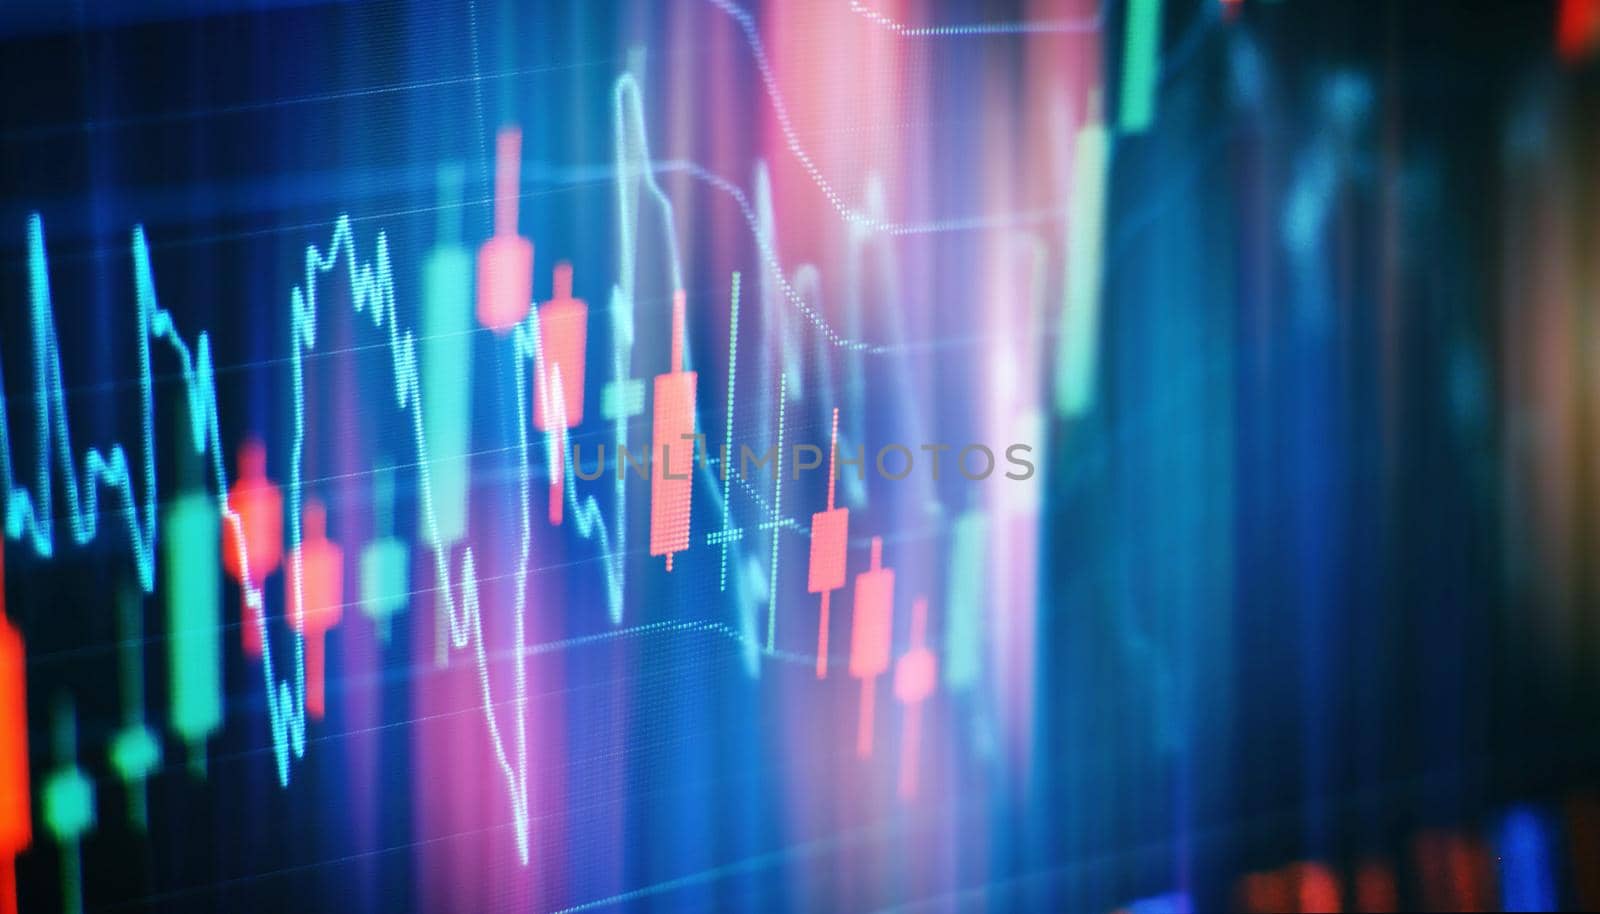 The fall of coronavirus exchanges . forex trading graph and candlestick chart suitable for financial investment concept. Economy trends background for business idea and all art work design. Abstract finance background. by Maximusnd